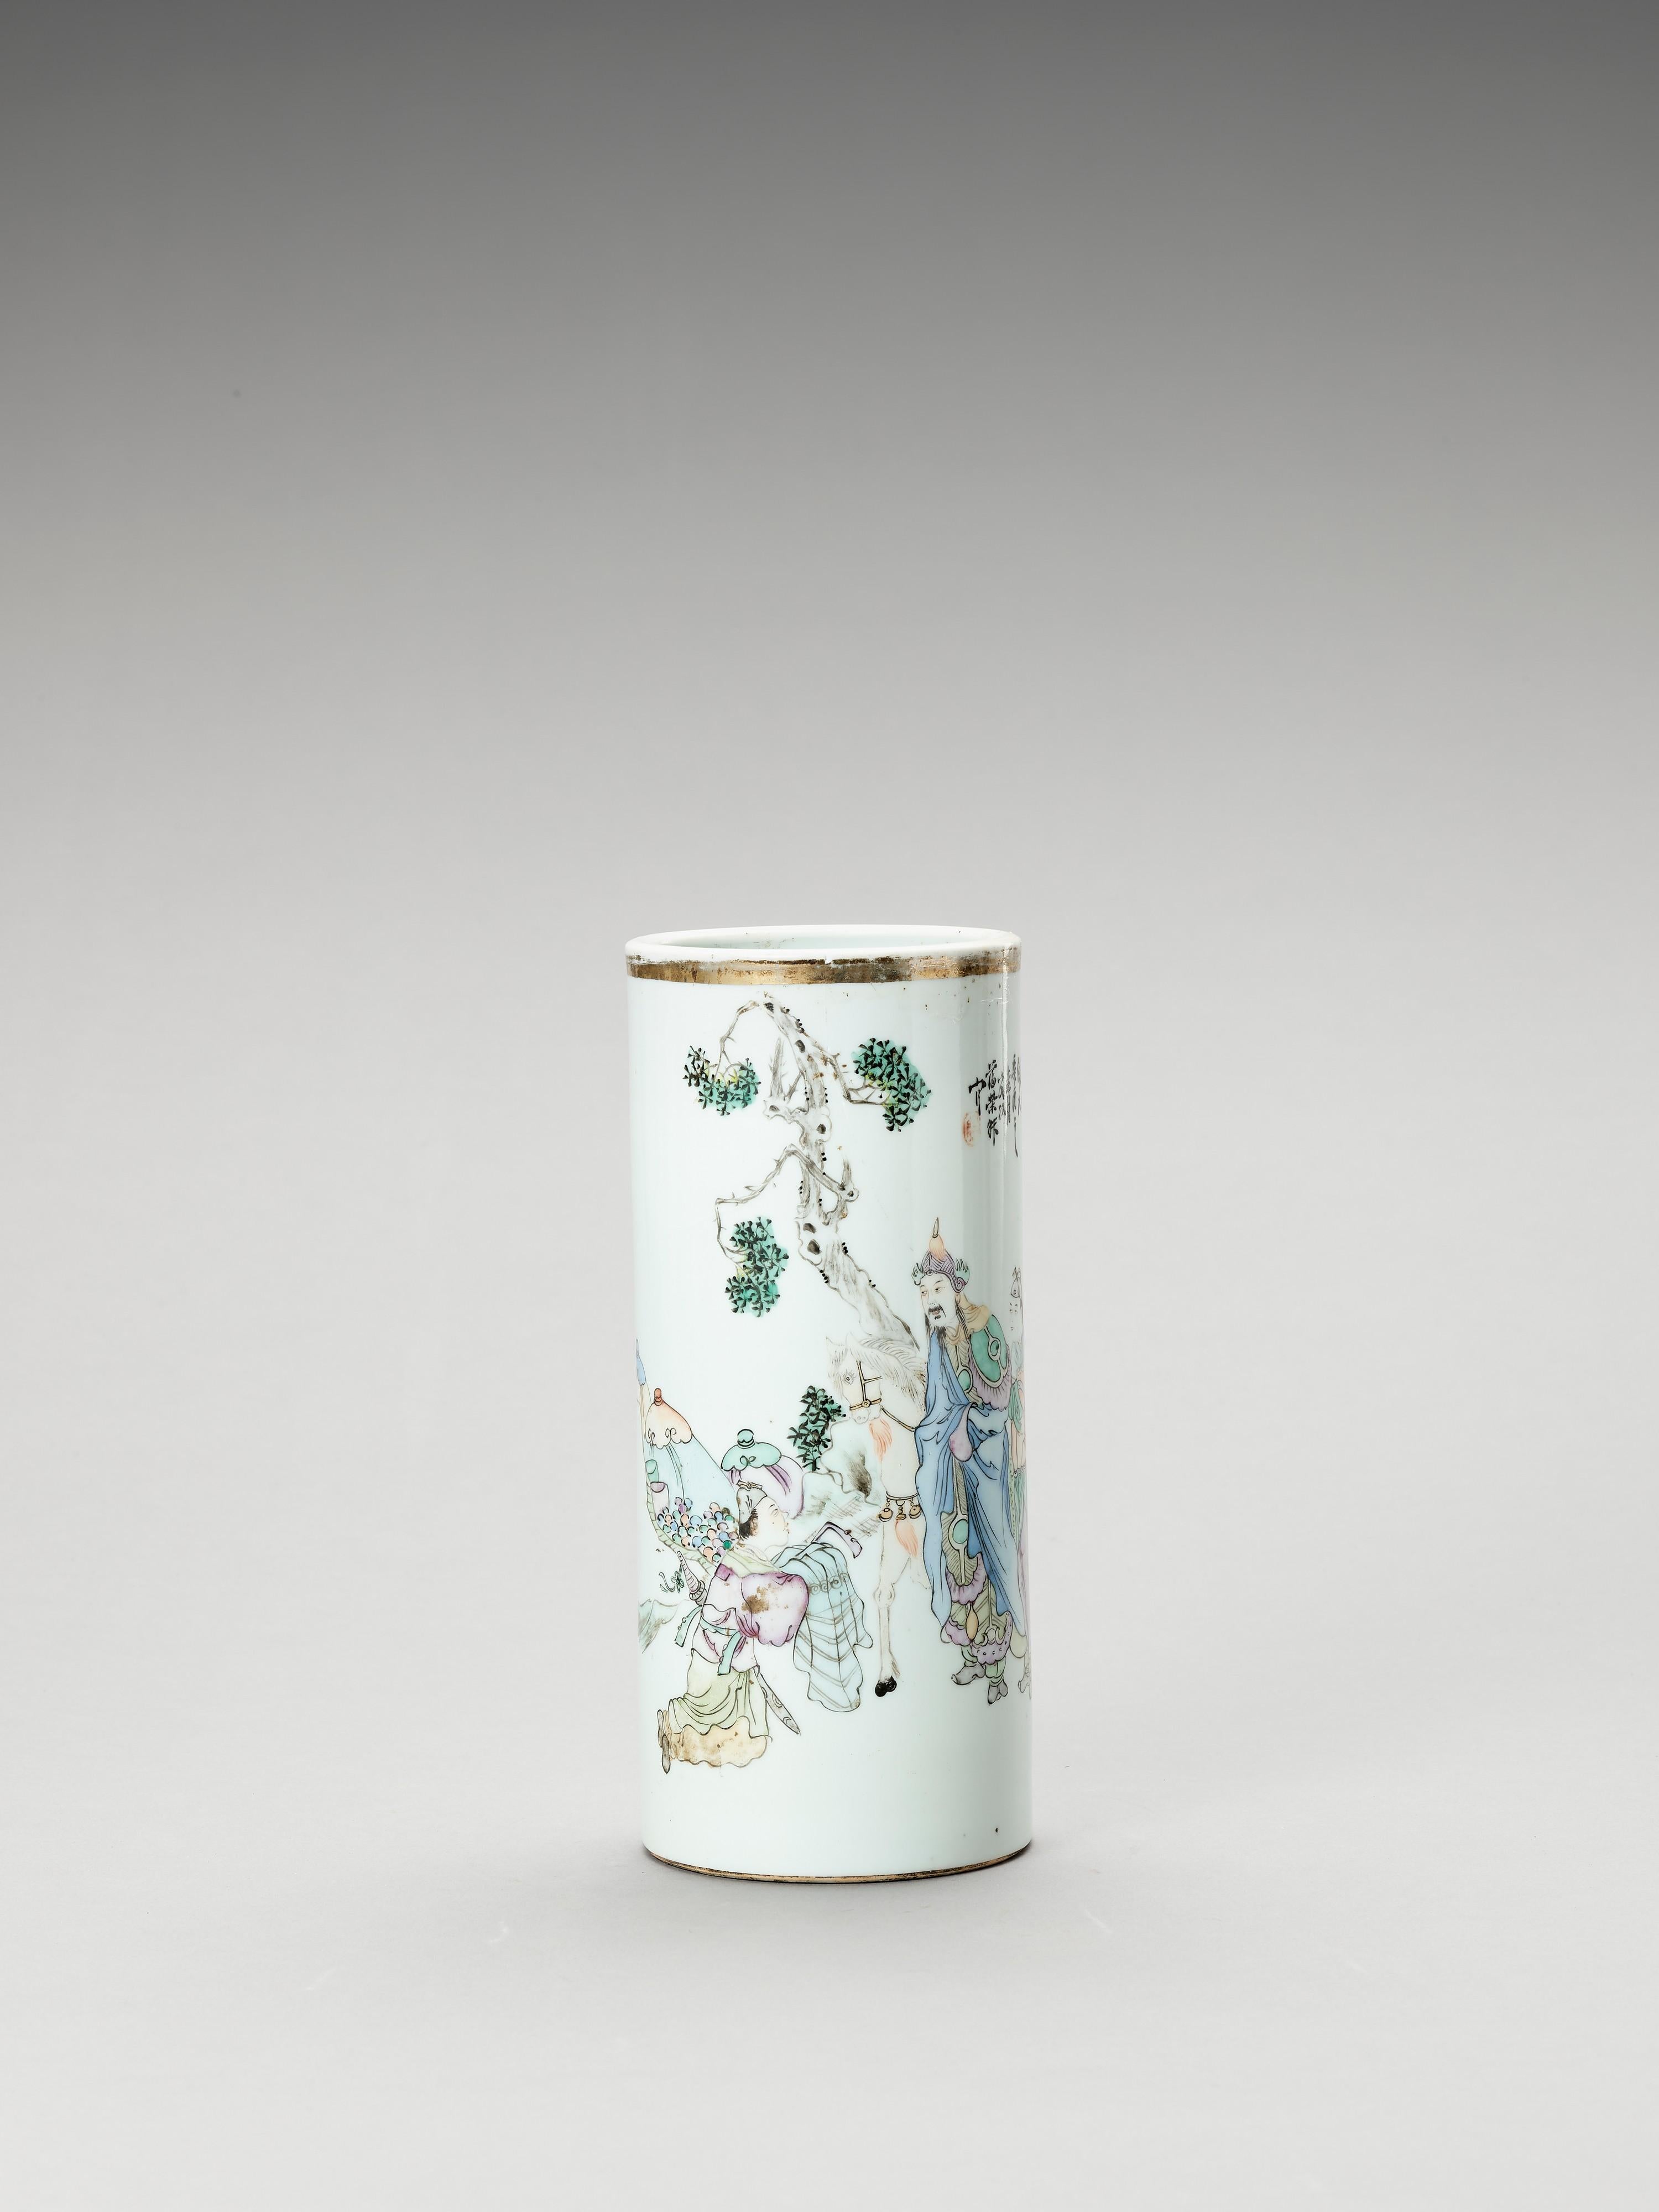 Chinese Enameled Cylindrical Porcelain vase, Late Qing to Republic Period, 1900-1950

The tall, cylindrical vase is painted with polychrome enamels showing a dignitary on horseback with a servant below a pine tree, to its left, a pile of treasure